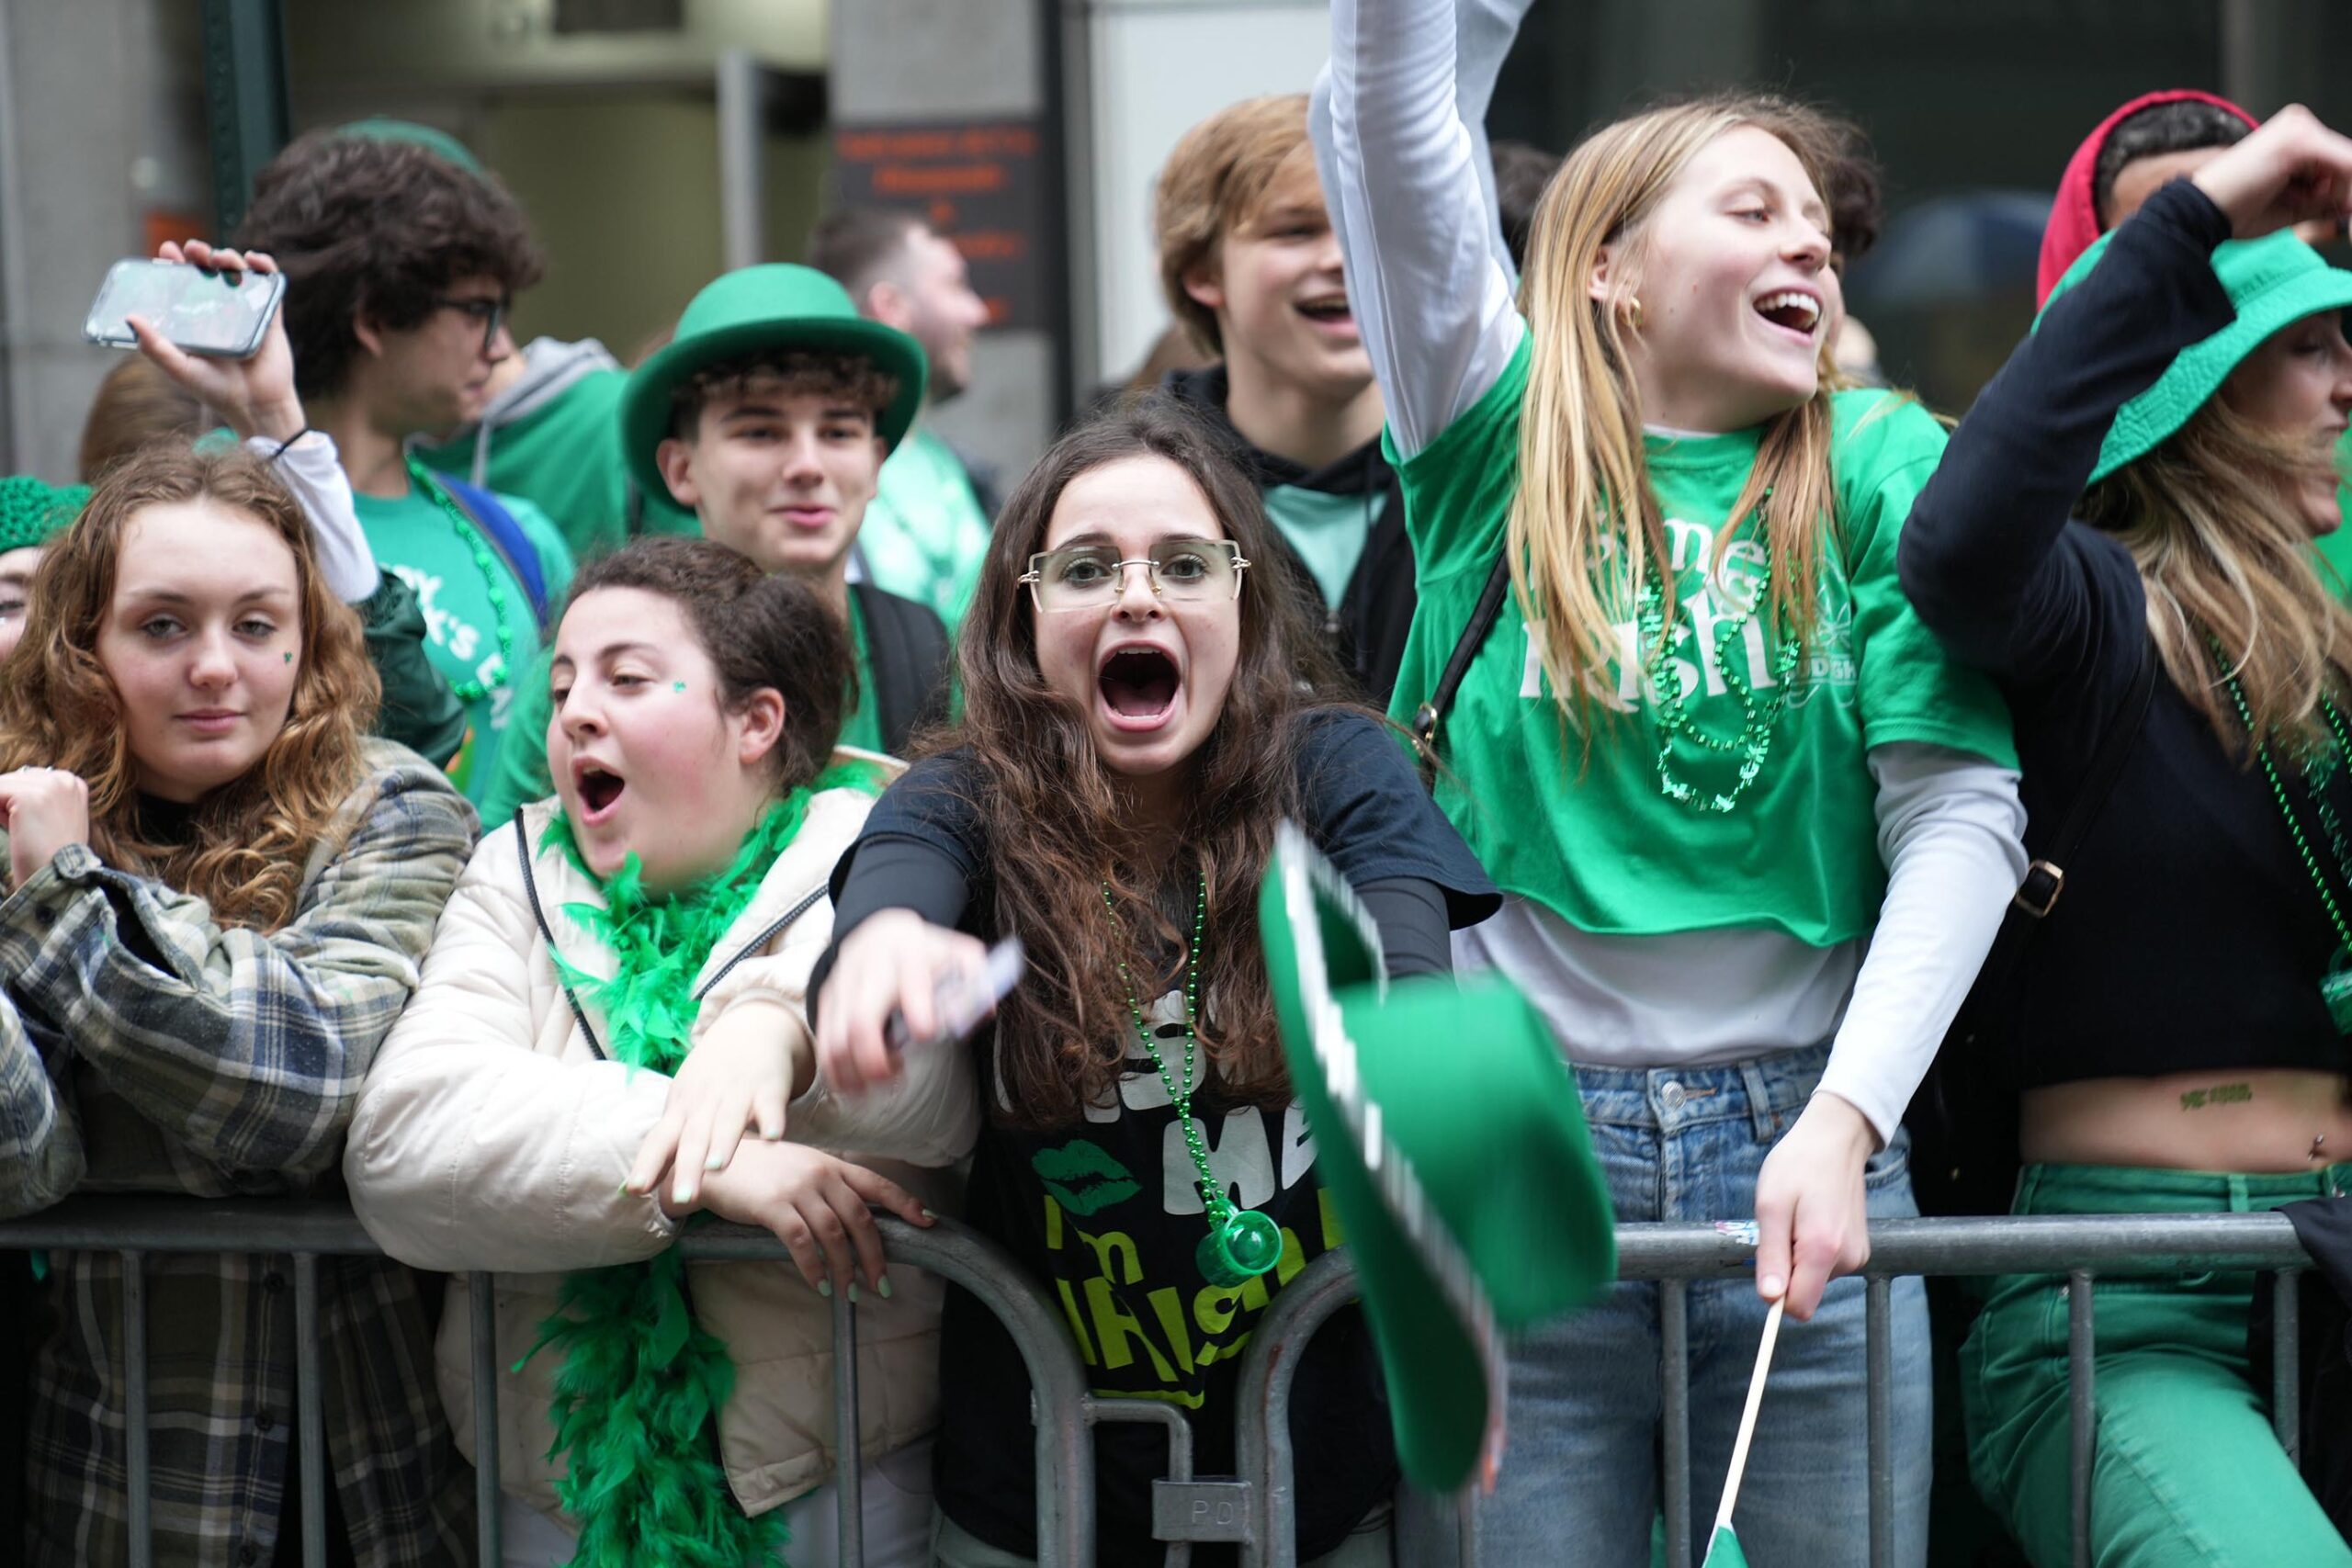 St. Patrick's Day Parade on Fifth Avenue in Manhattan on Thursday, March 17, 2022. Michael Appleton/Mayoral Photography Office